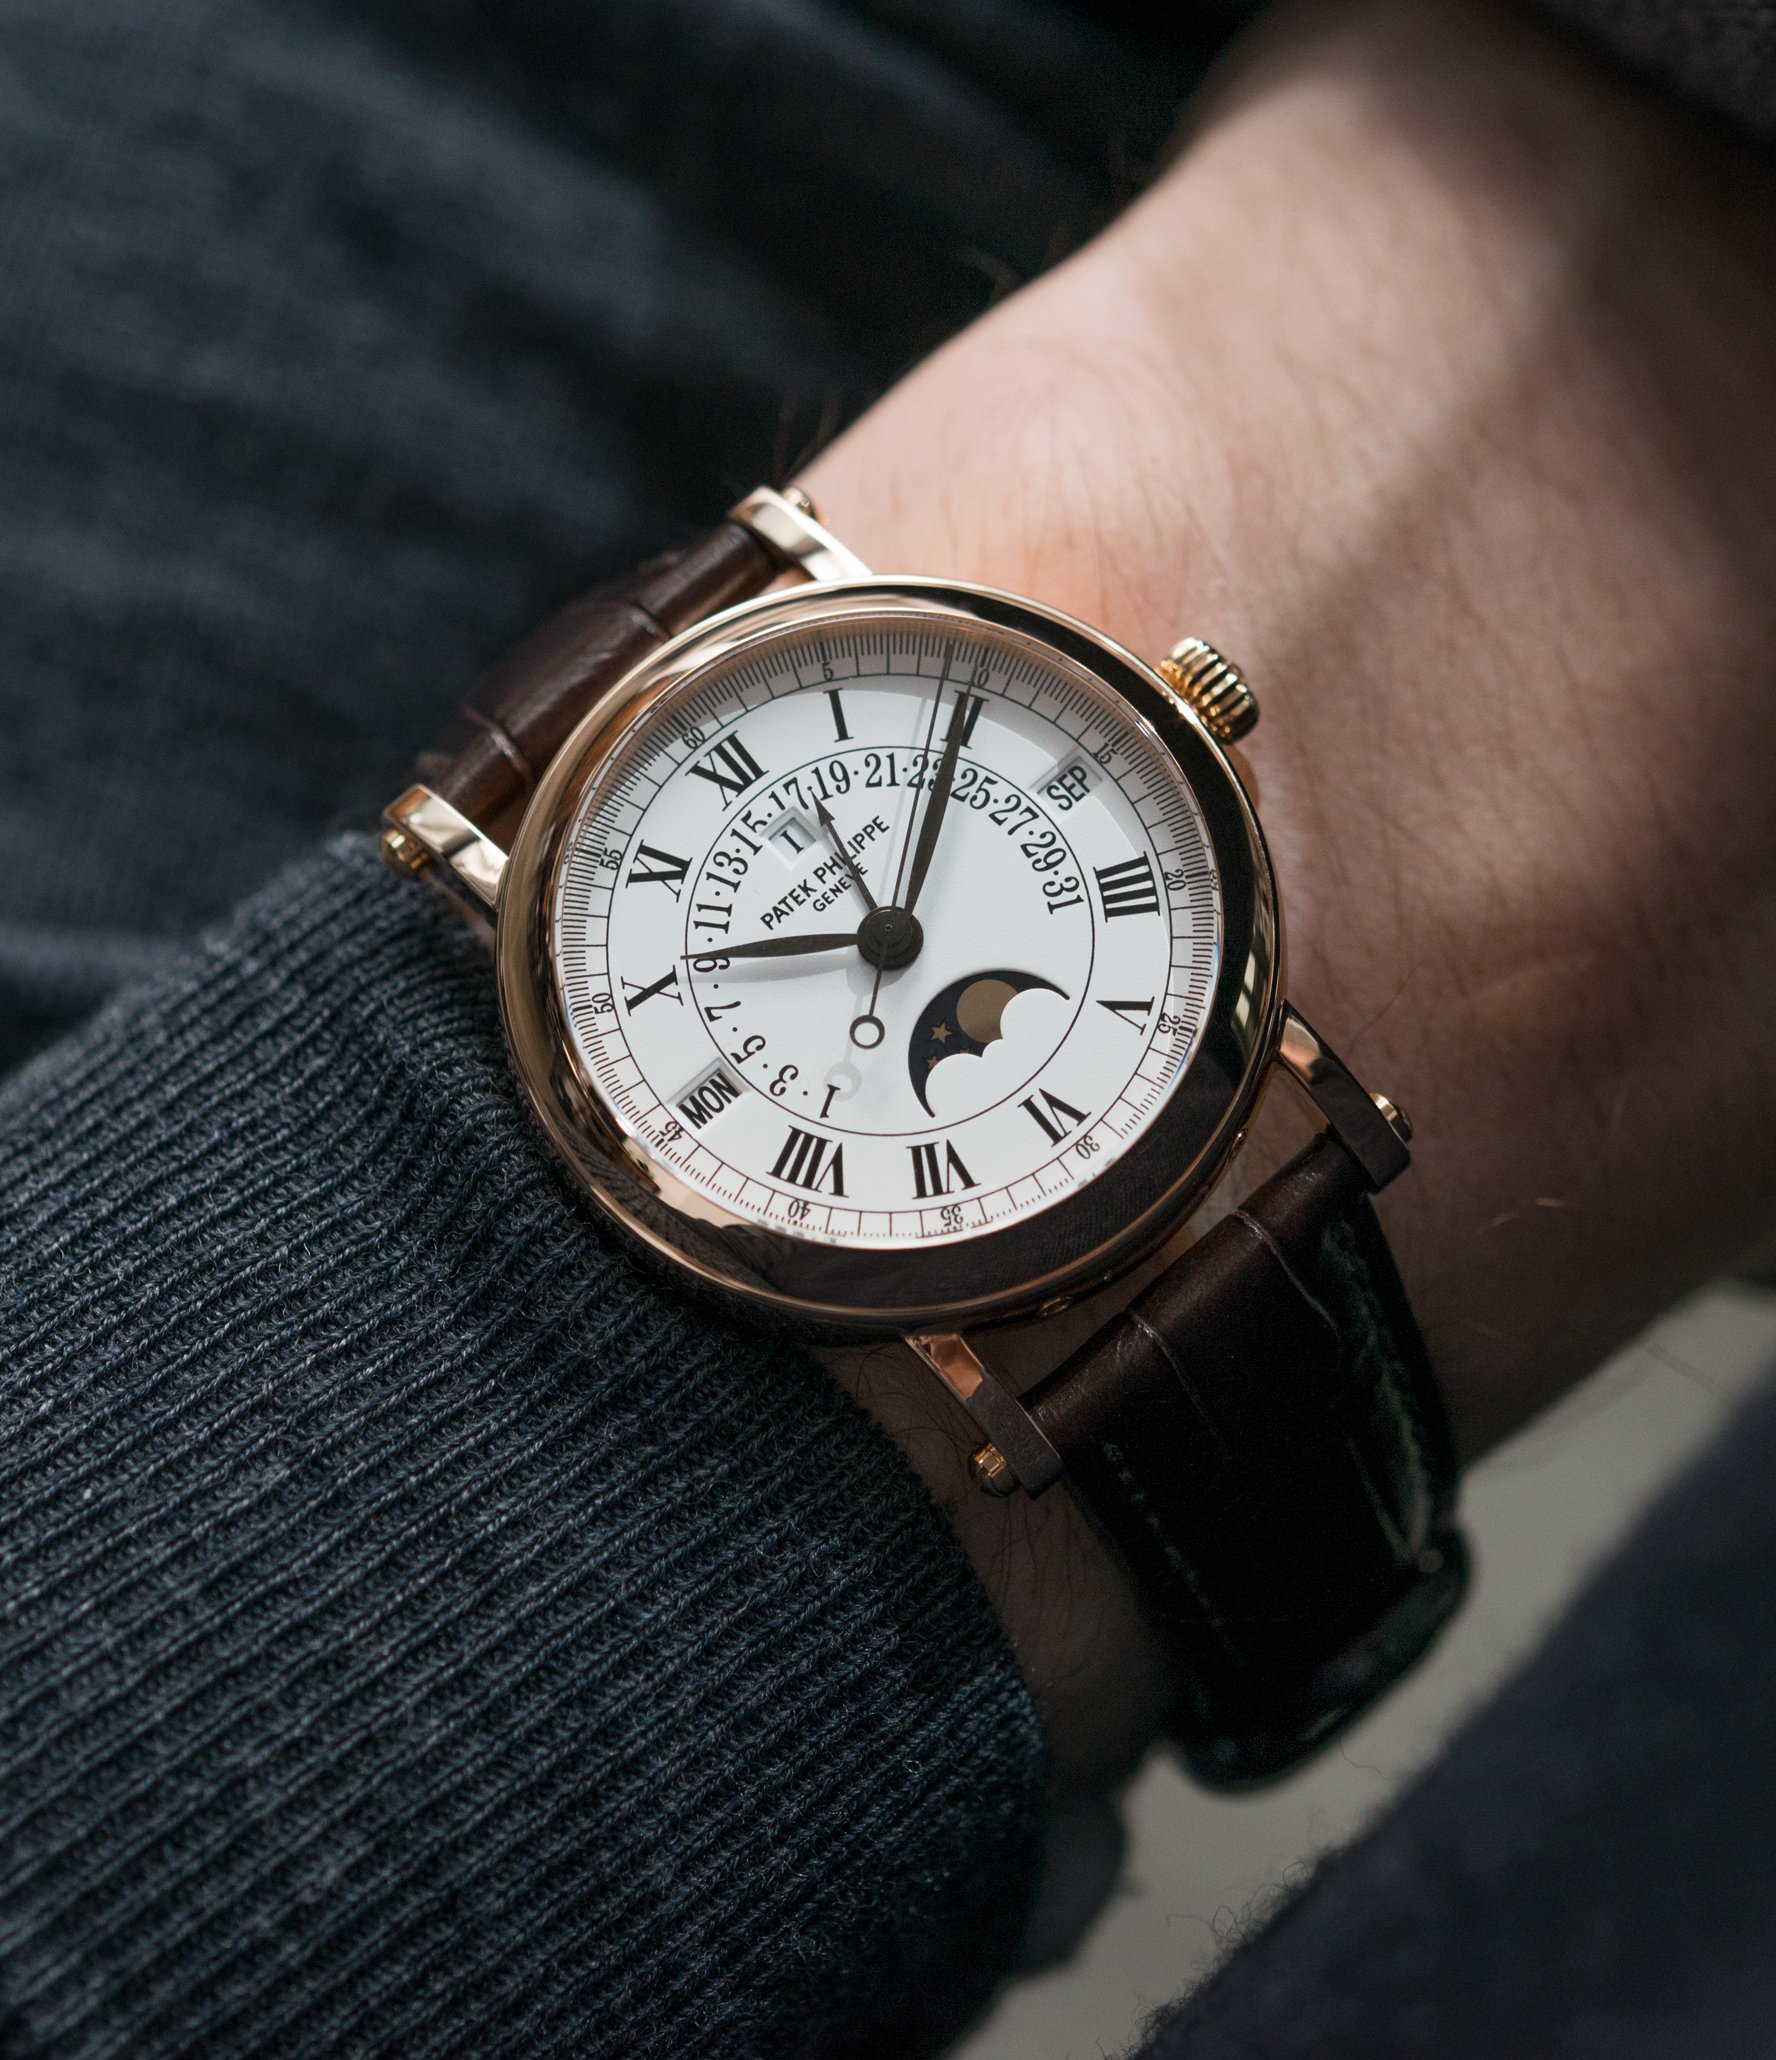 The Patek Philippe Grand Complications | The Hour Glass Official